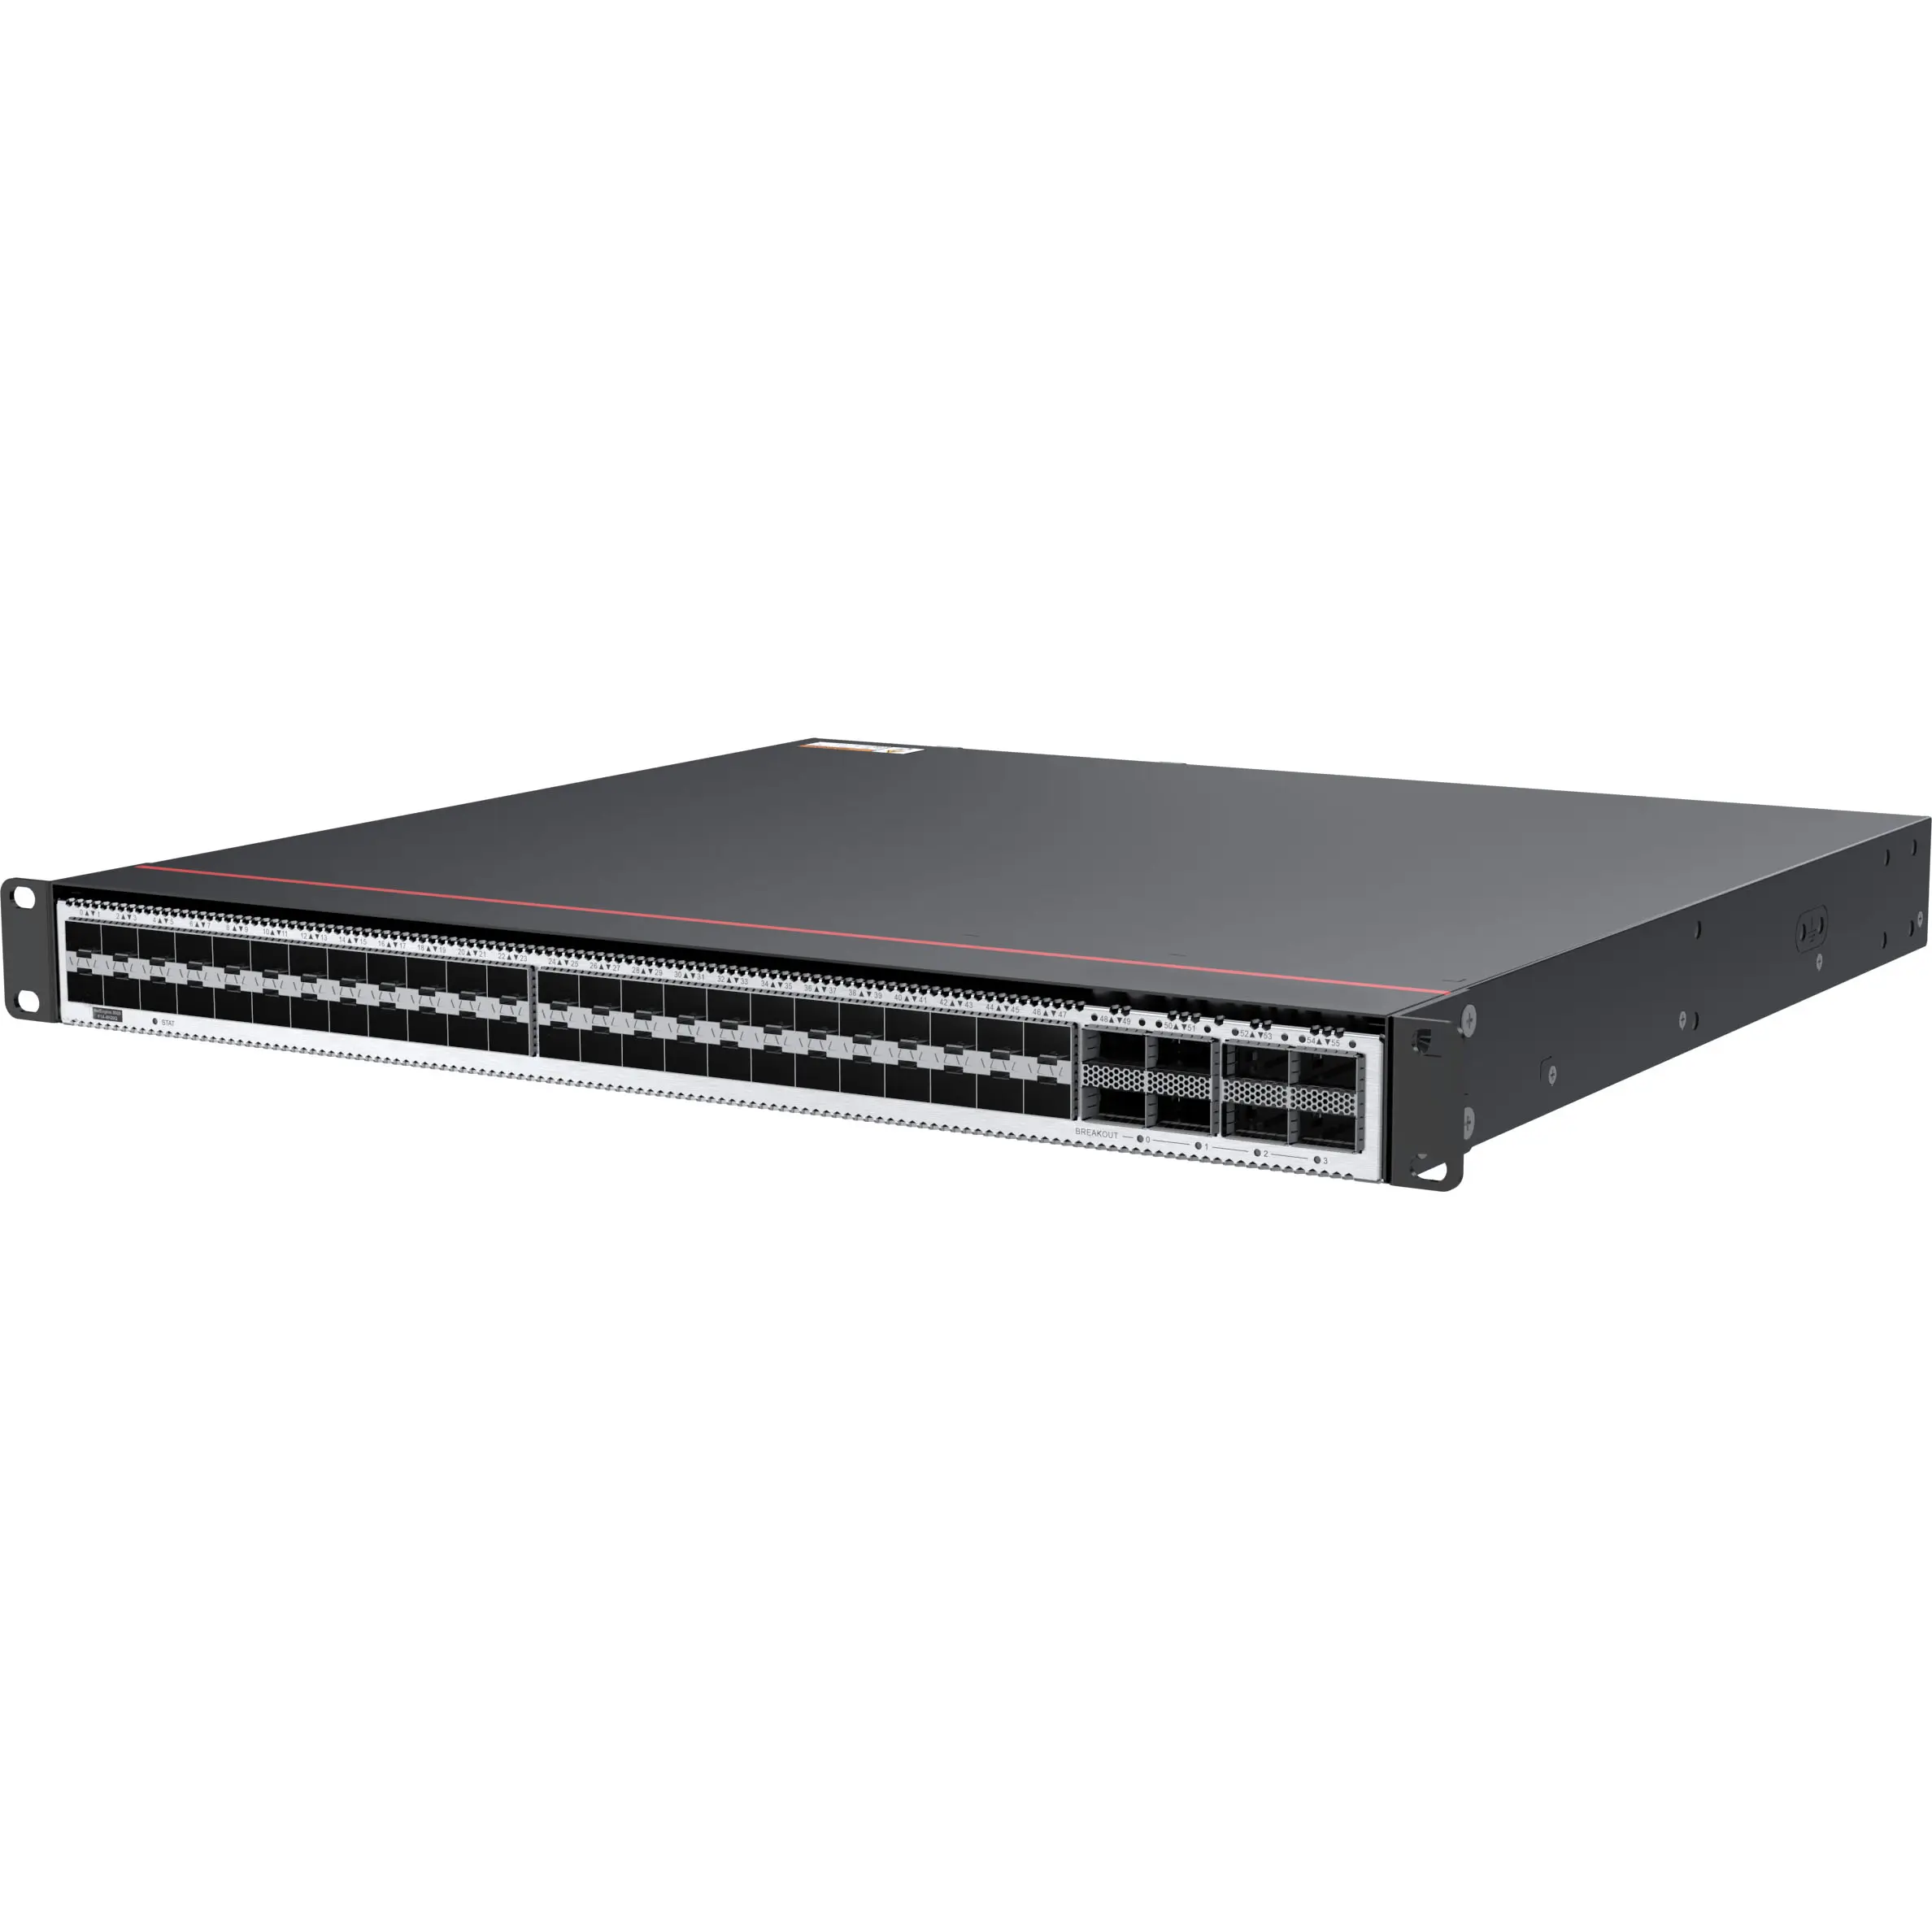 Brand New NetEngine 8000 F1A-8H20Q Router Integrated Net Engine Chassis Components In Stock Netengine 8000 f1a